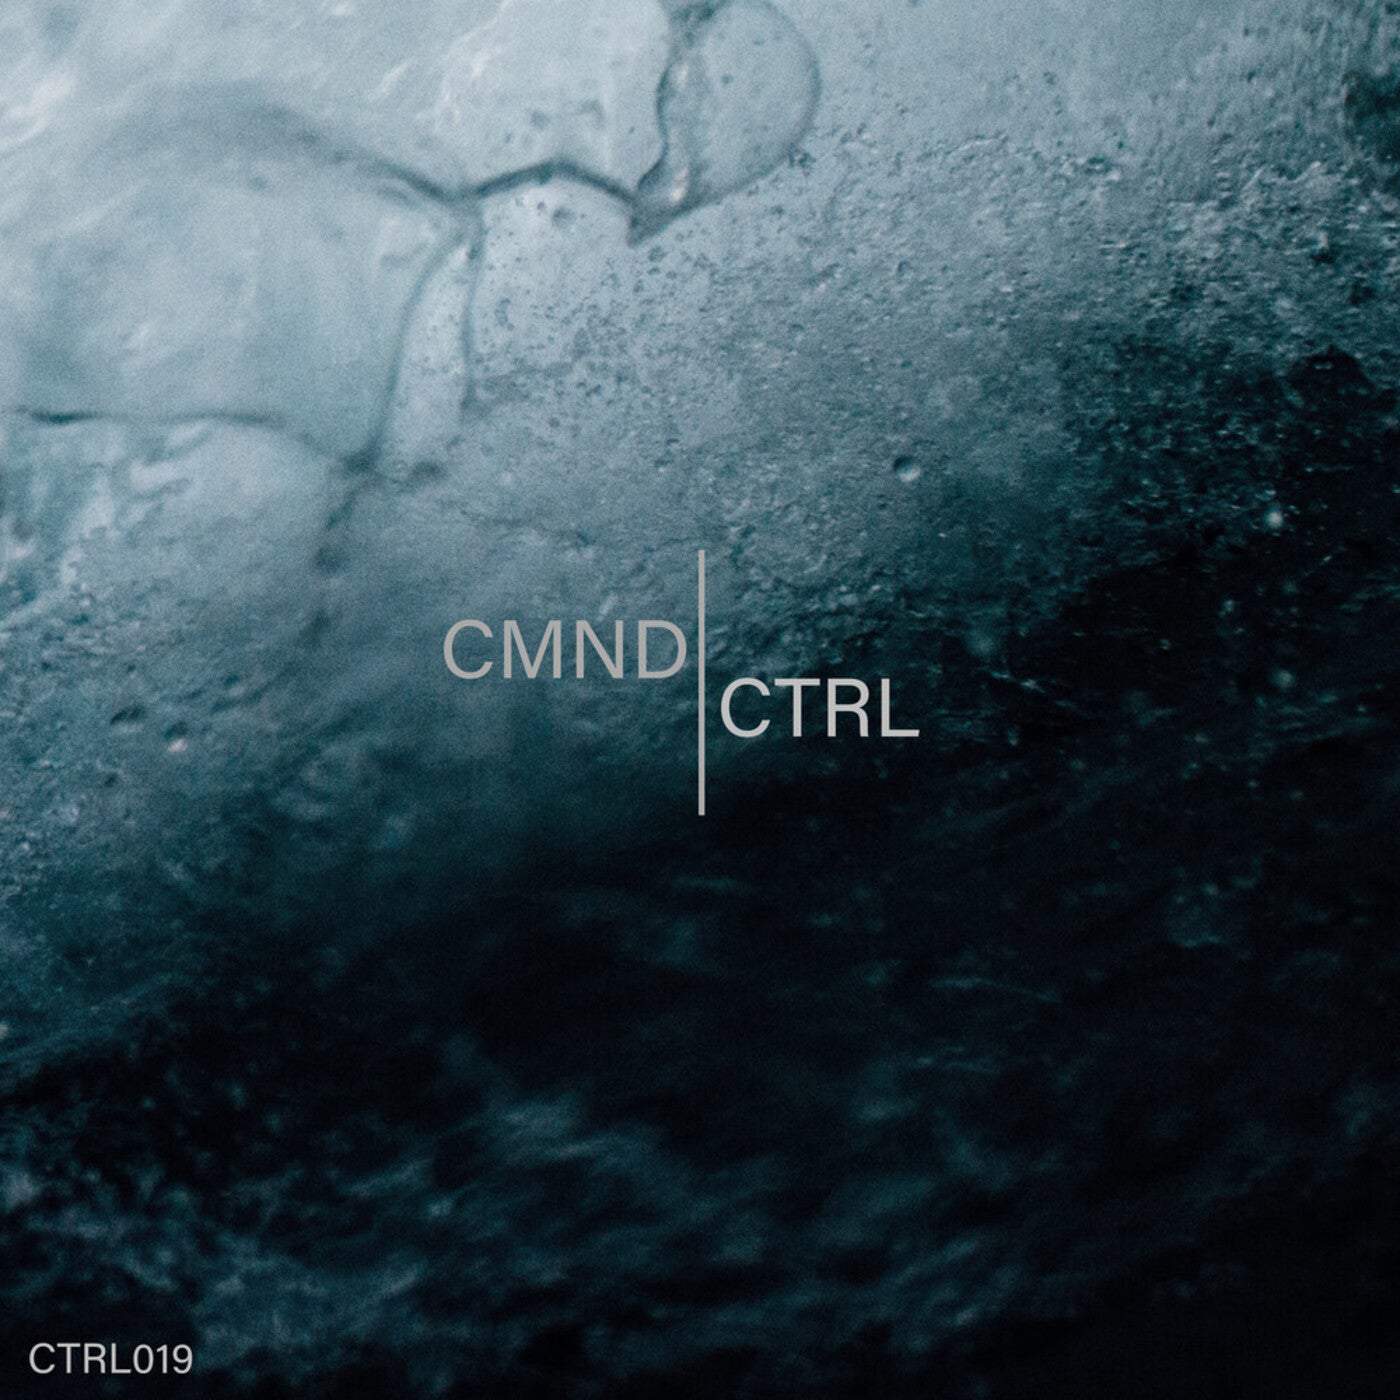 Download CDTRAX - CTRL019 on Electrobuzz